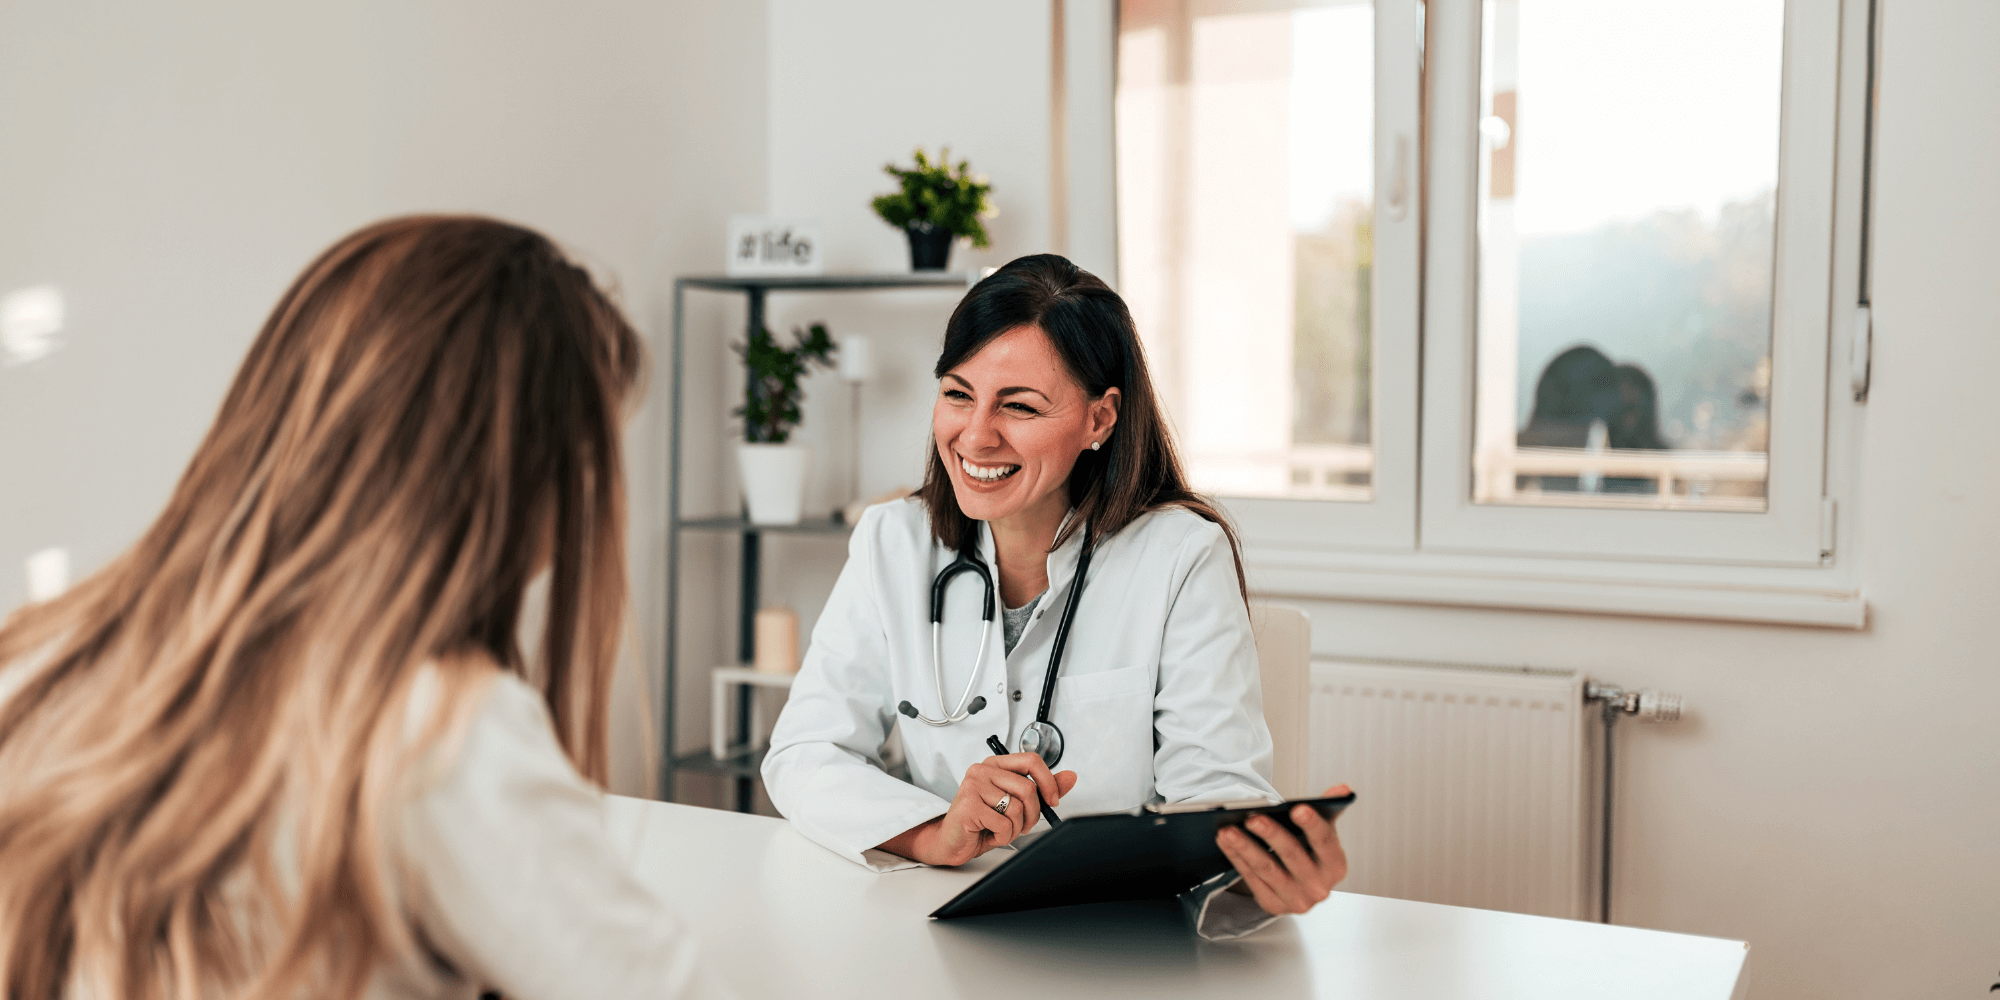 Female doctor sitting at a table in an office,  holding a clipboard smiling at a female patient